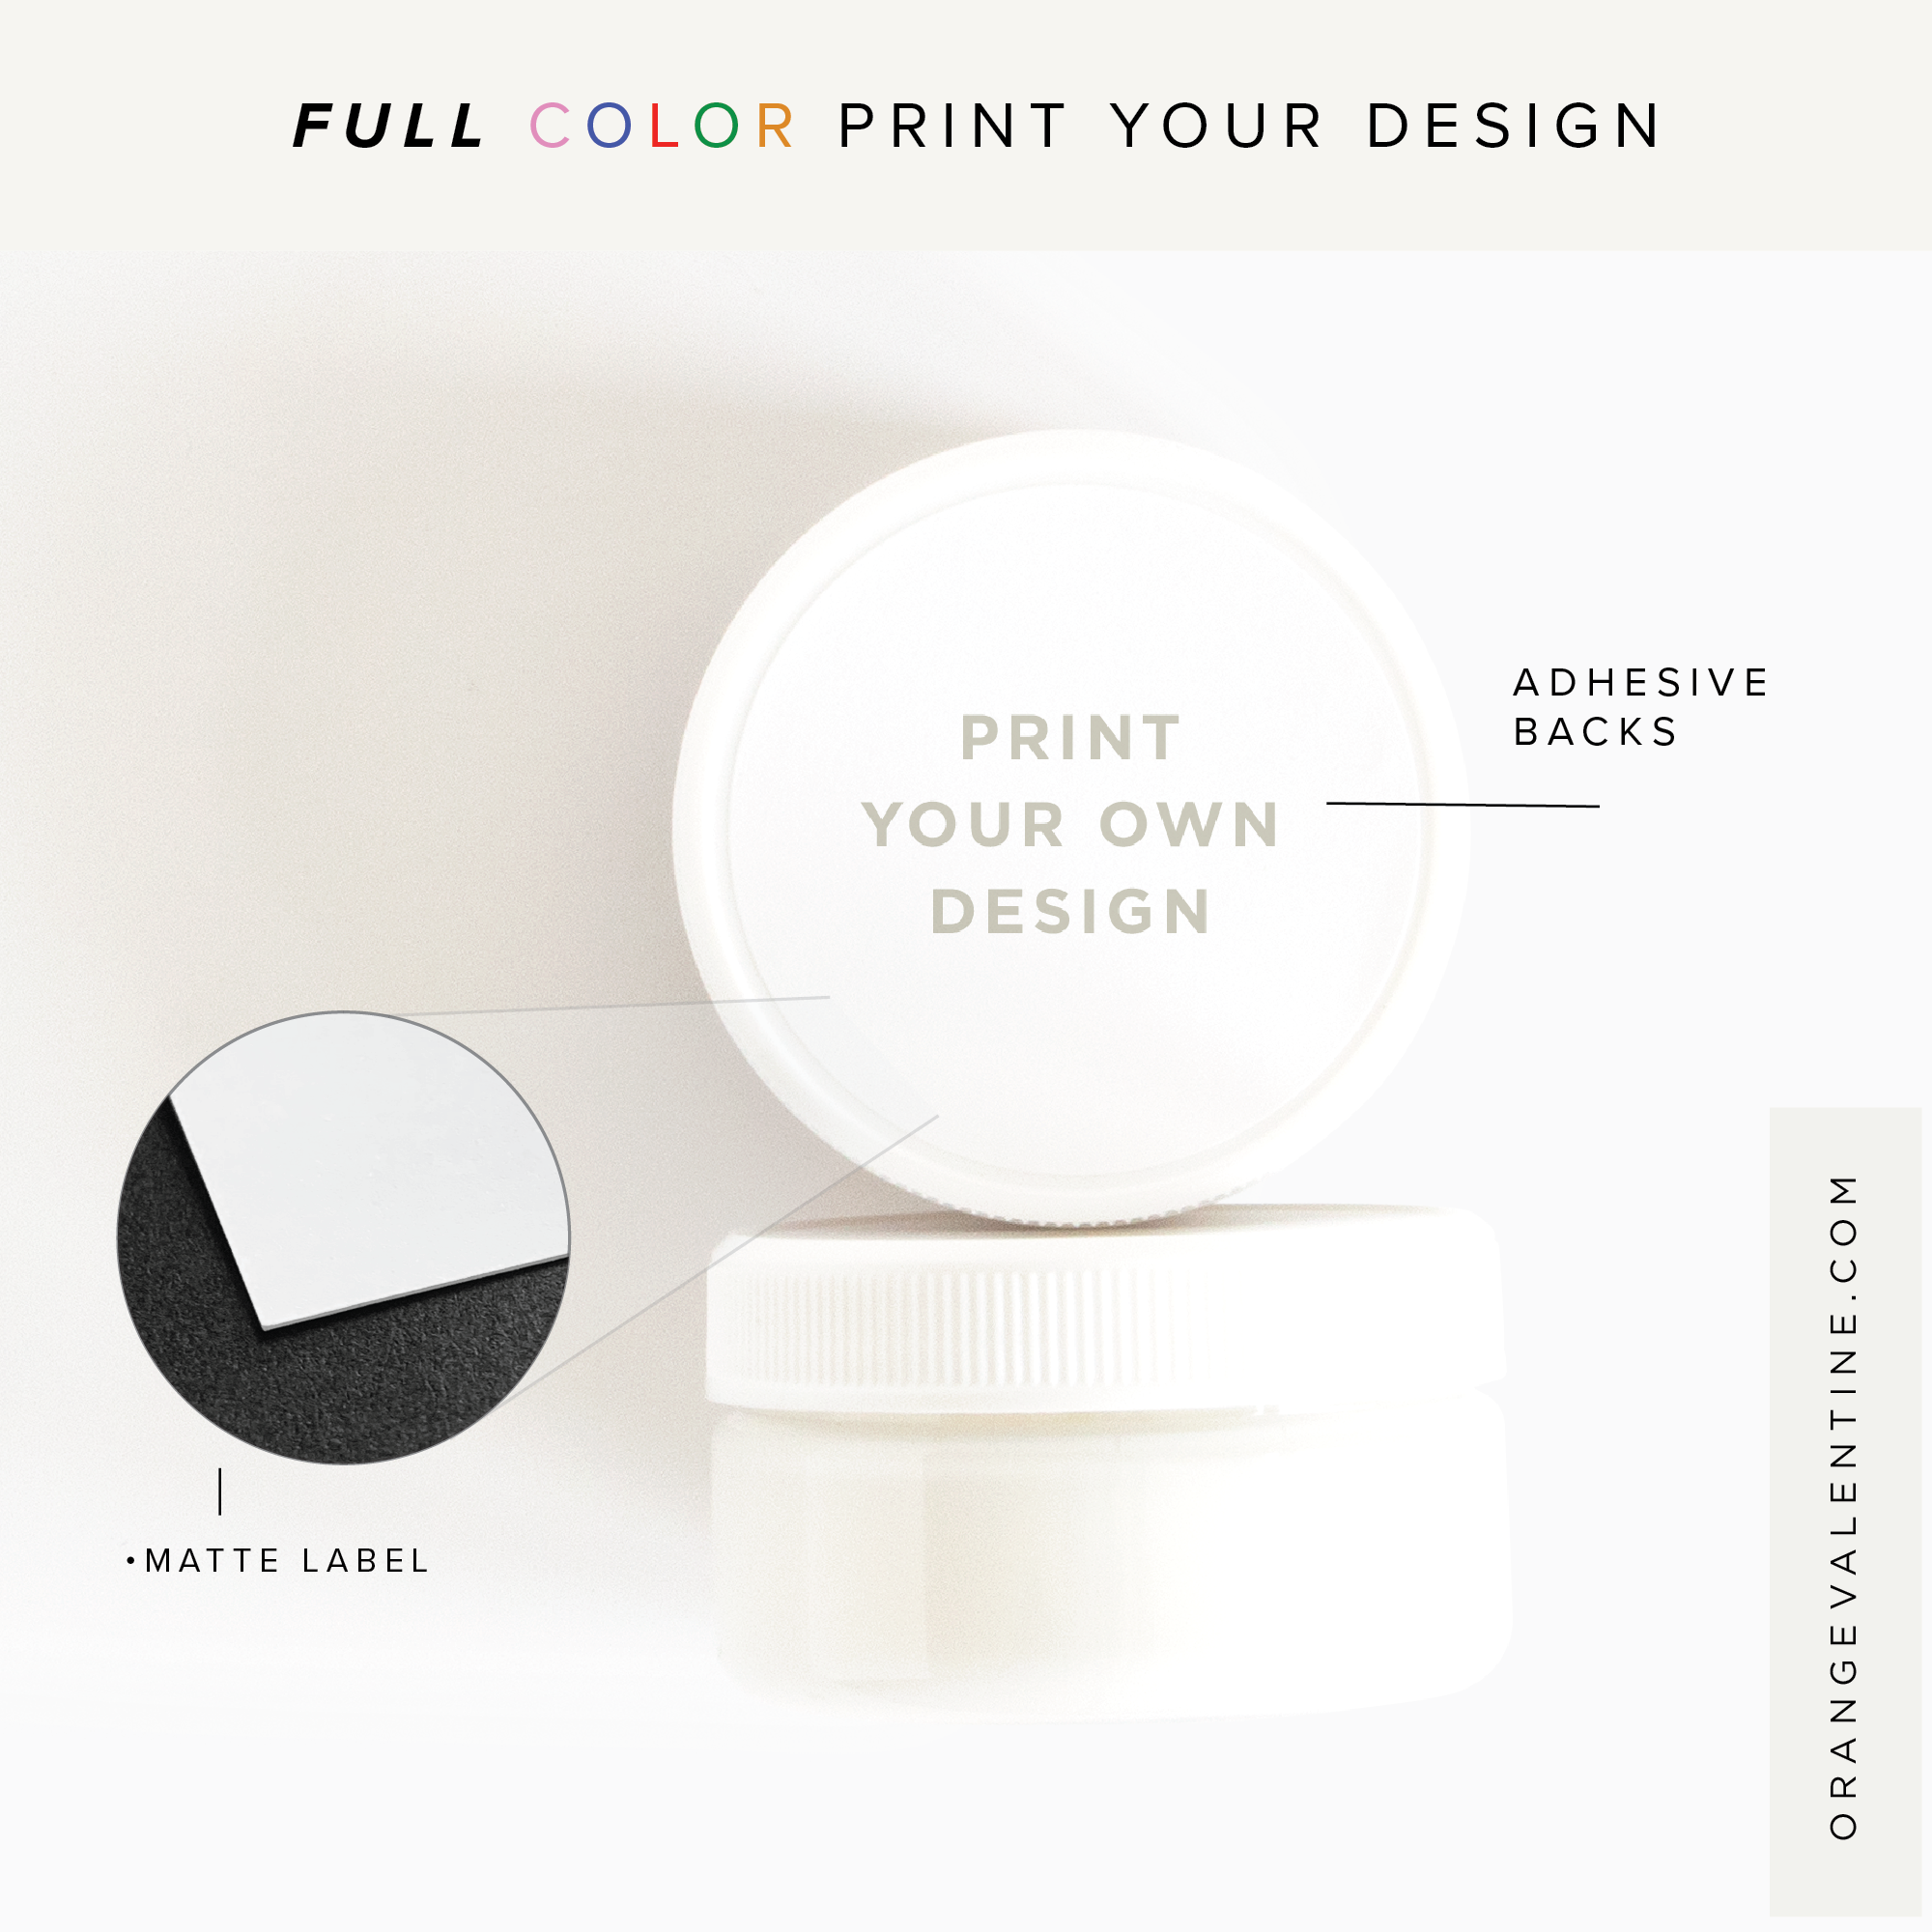 Print Your Own Round Product Label